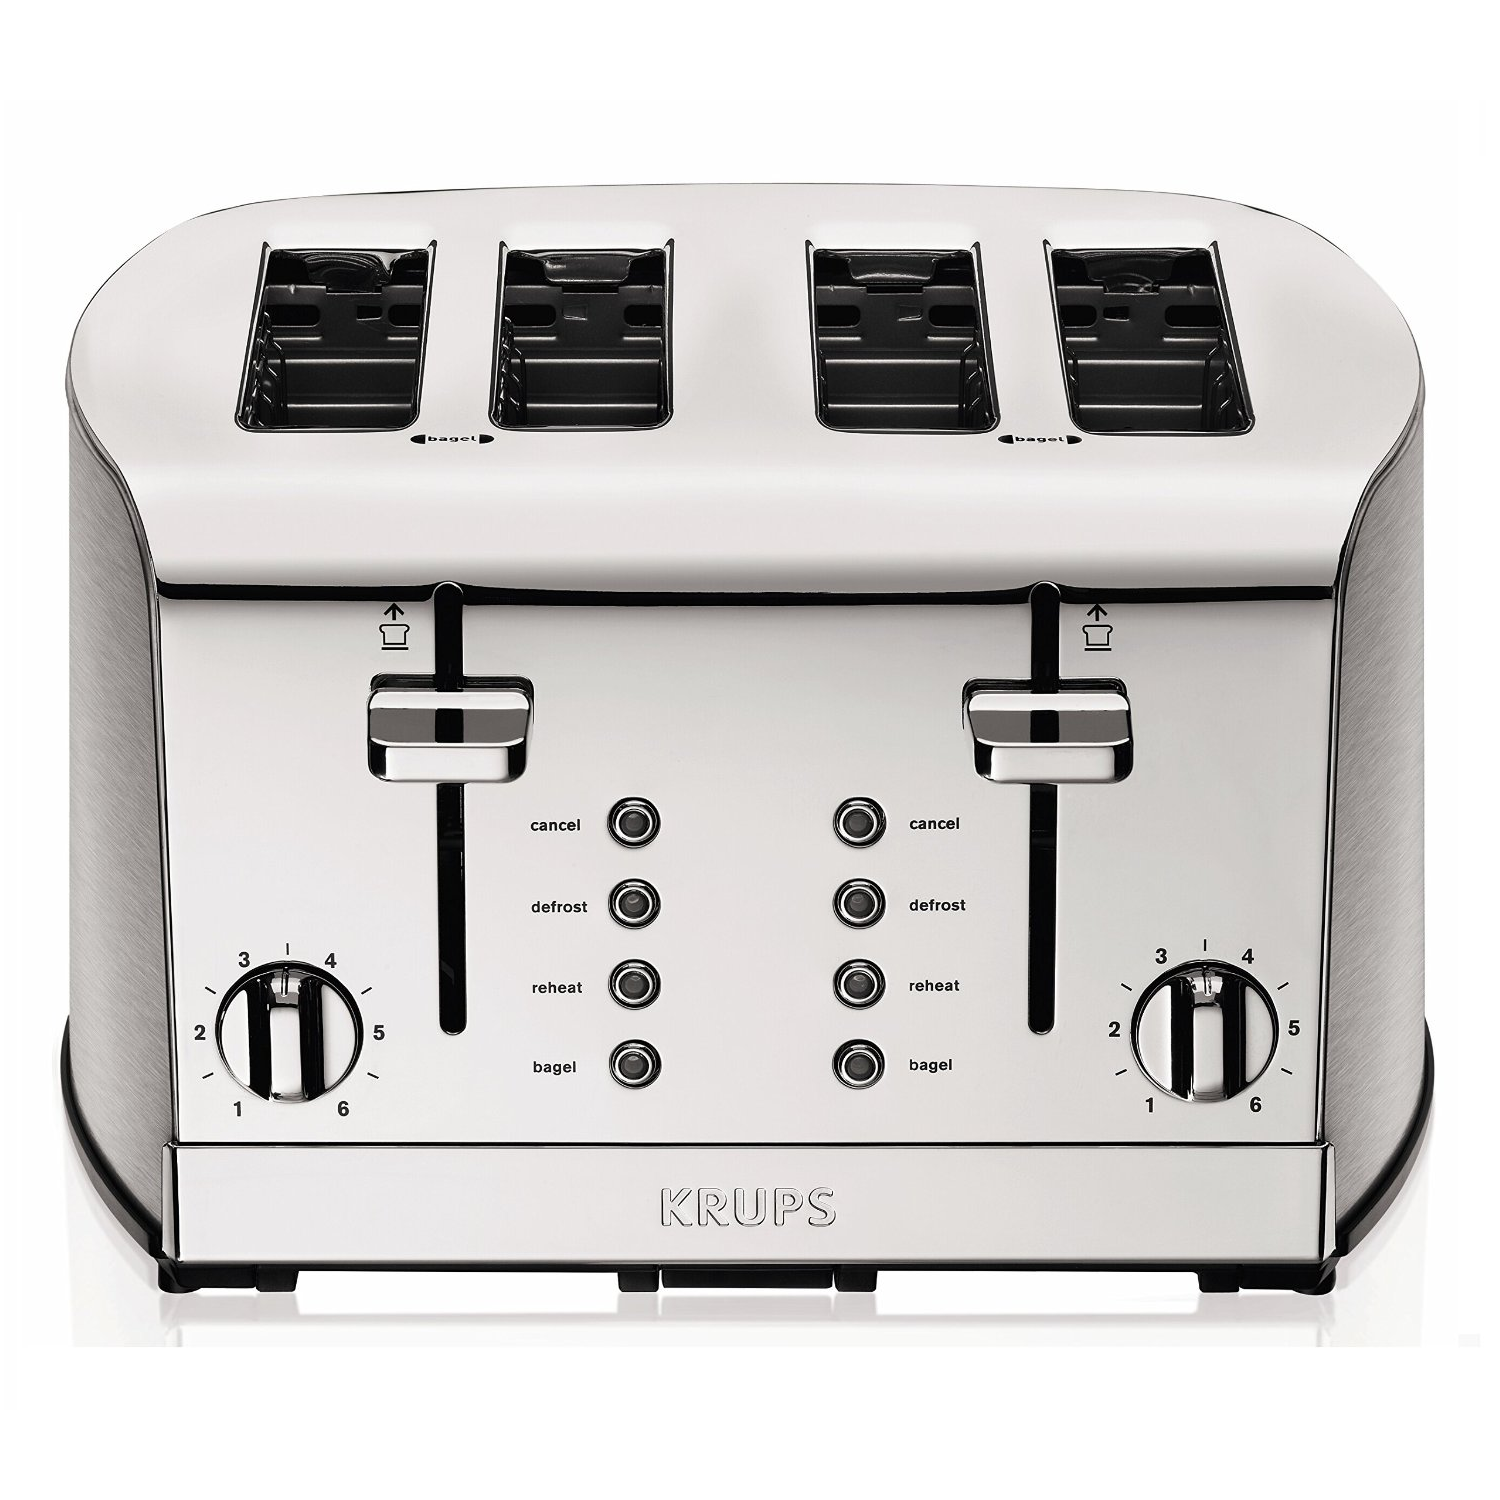 Amazon: 4 Slot Toaster with Brushed and Chrome Stainless Steel Only $39.99 Shipped!